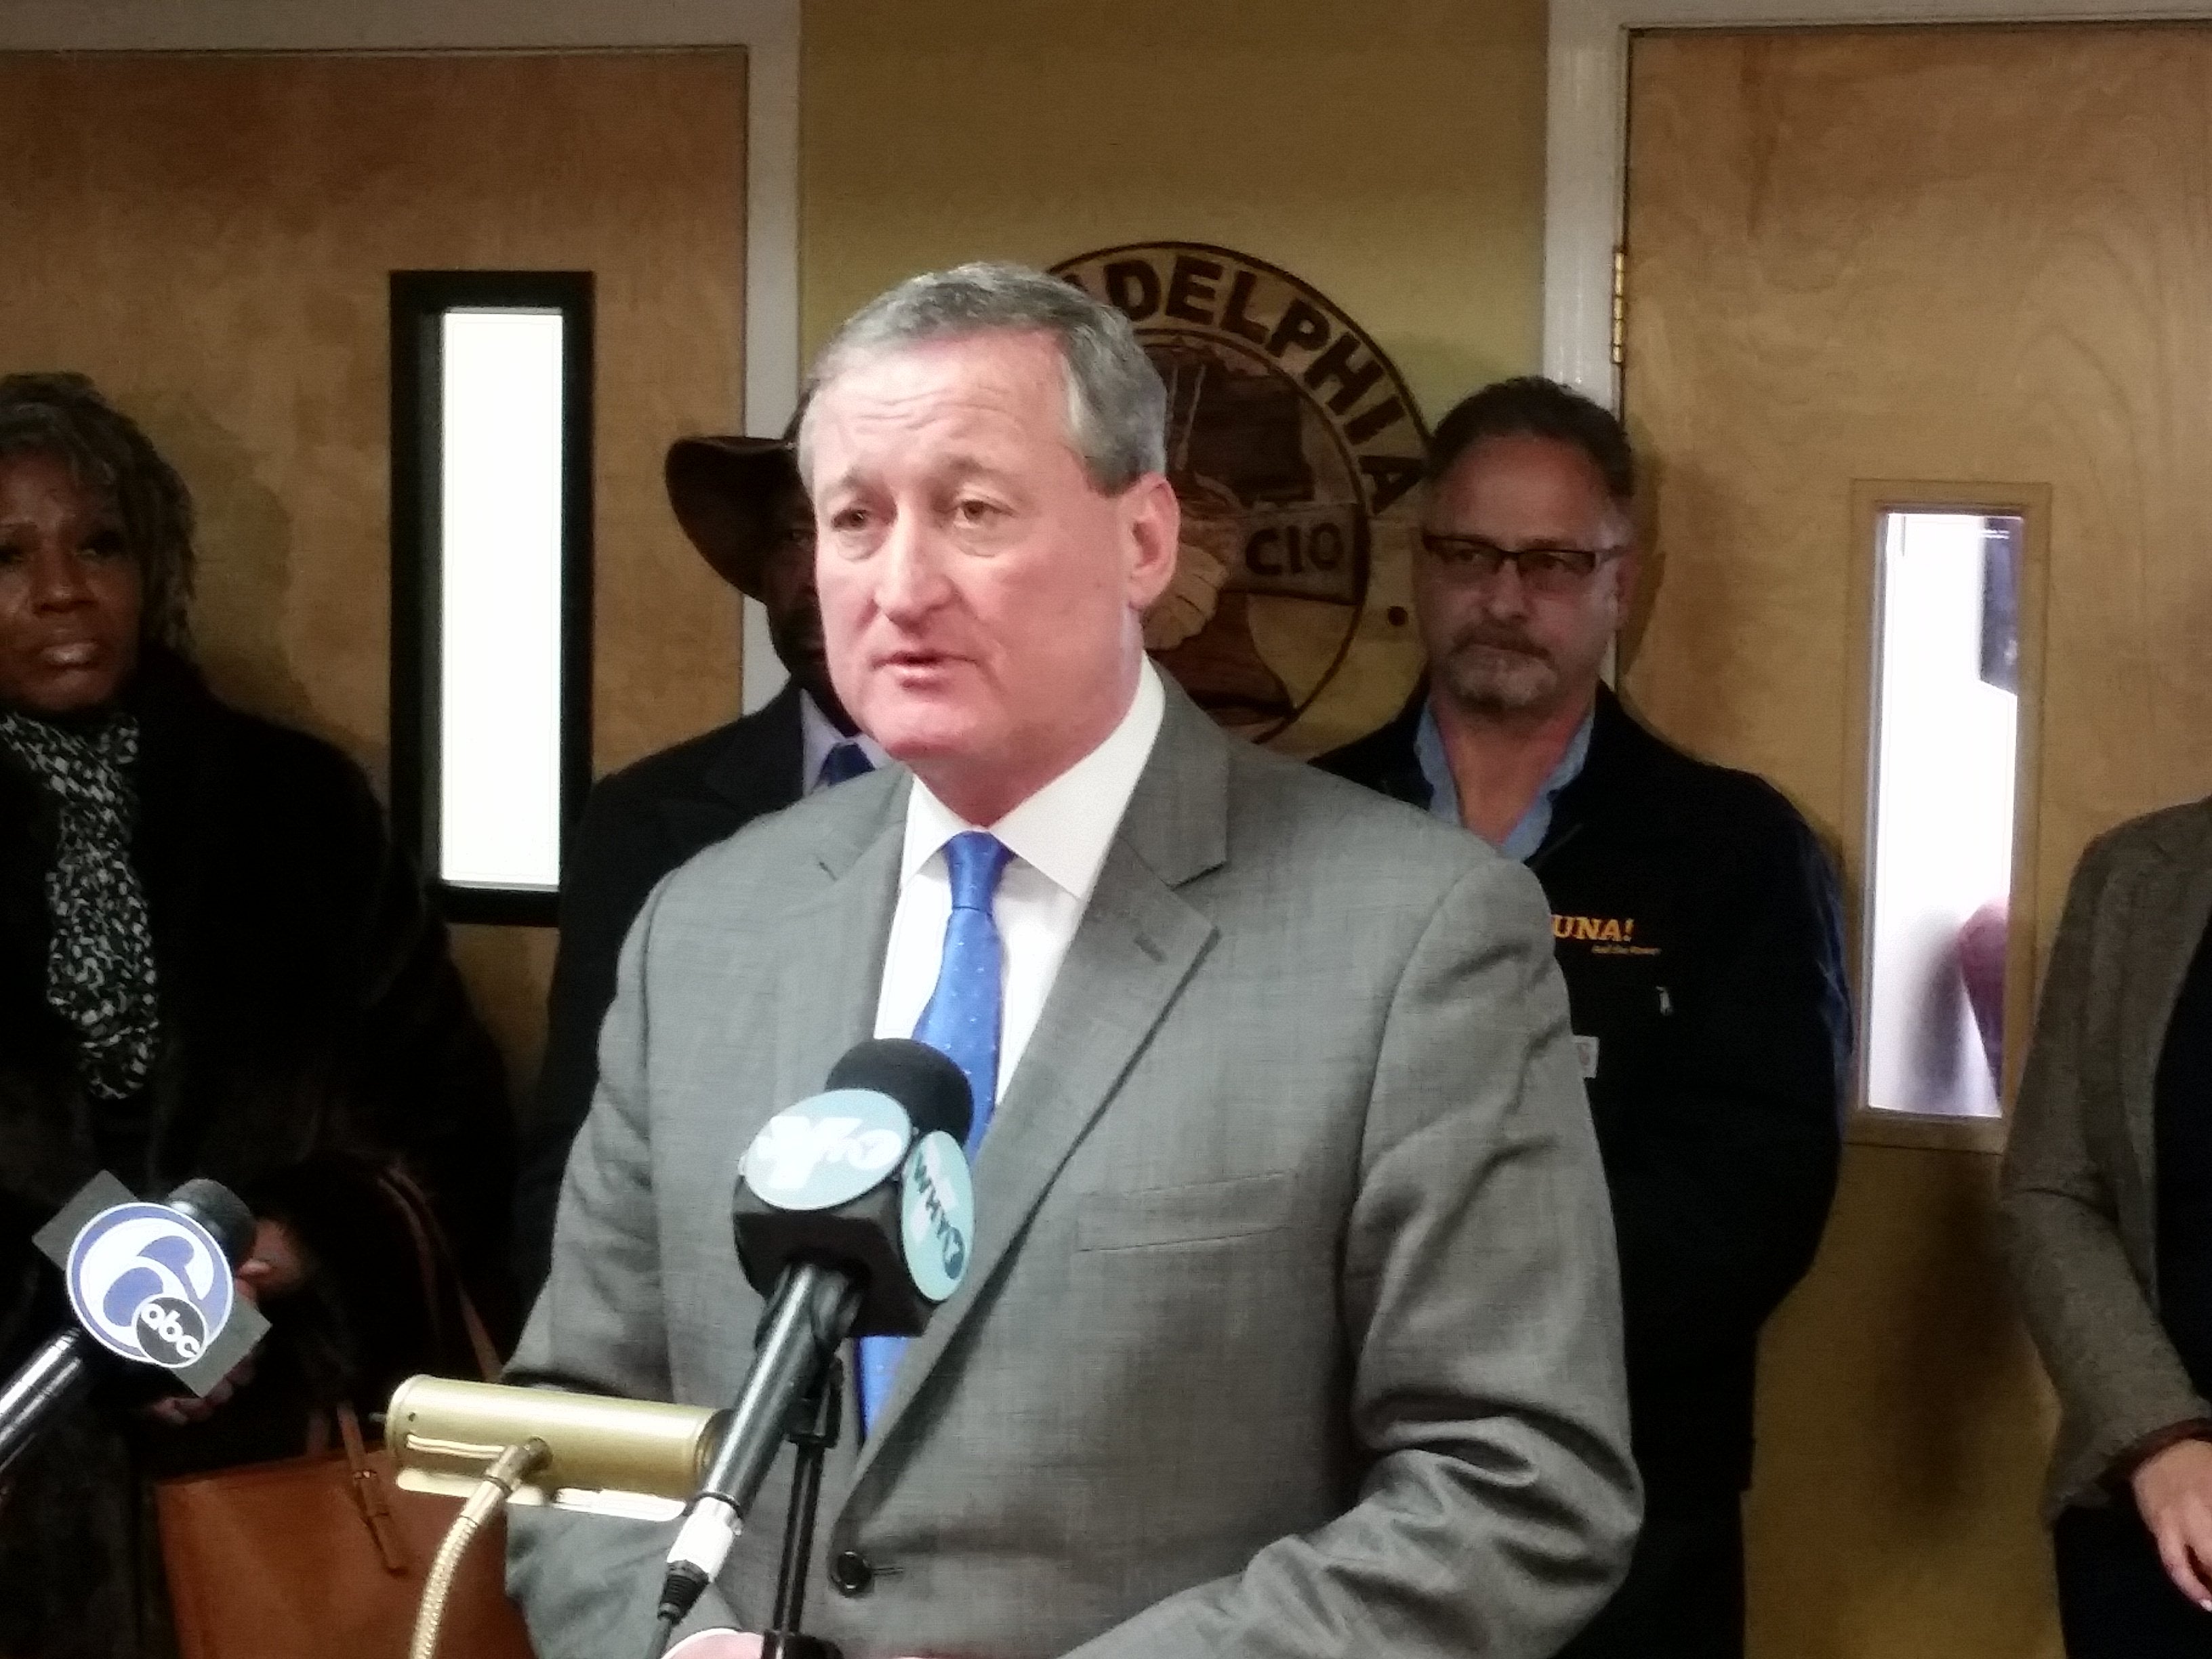  Mayoral candidate Jim Kenney accepts the endorsement of the AFL-CIO Council of Philadelphia in his bid for City Hall. (Tom MacDonald/WHYY) 